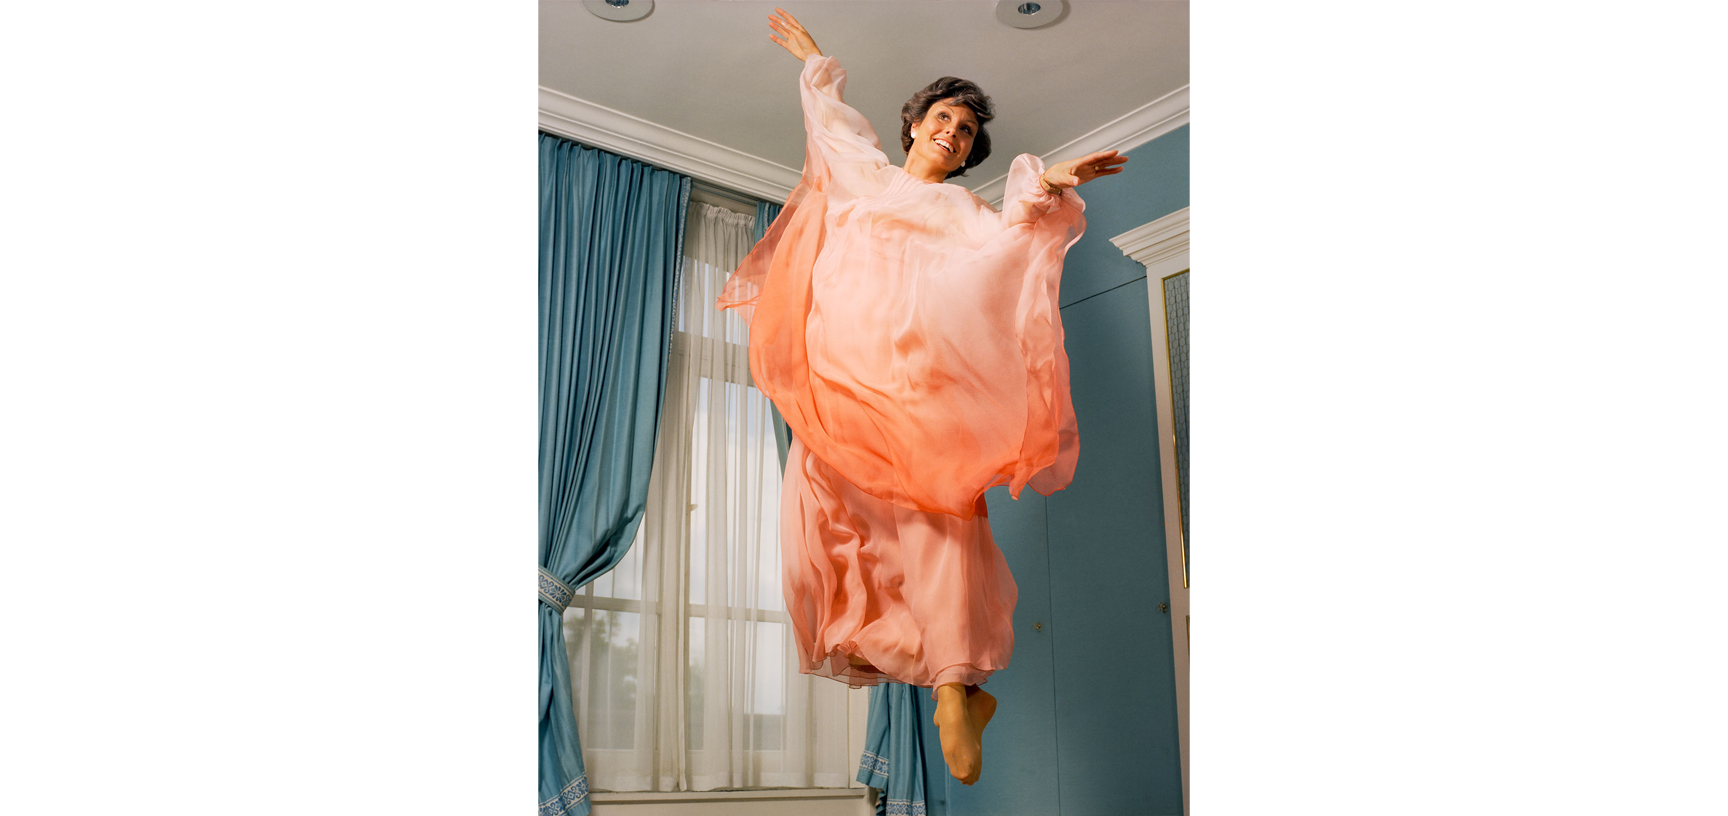 Portrait of Angela Rippon - a young white woman with short brown hair, dressed in a peach chiffon dress, jumping in the air, arms outstreched and toes pointed, looking into the distance